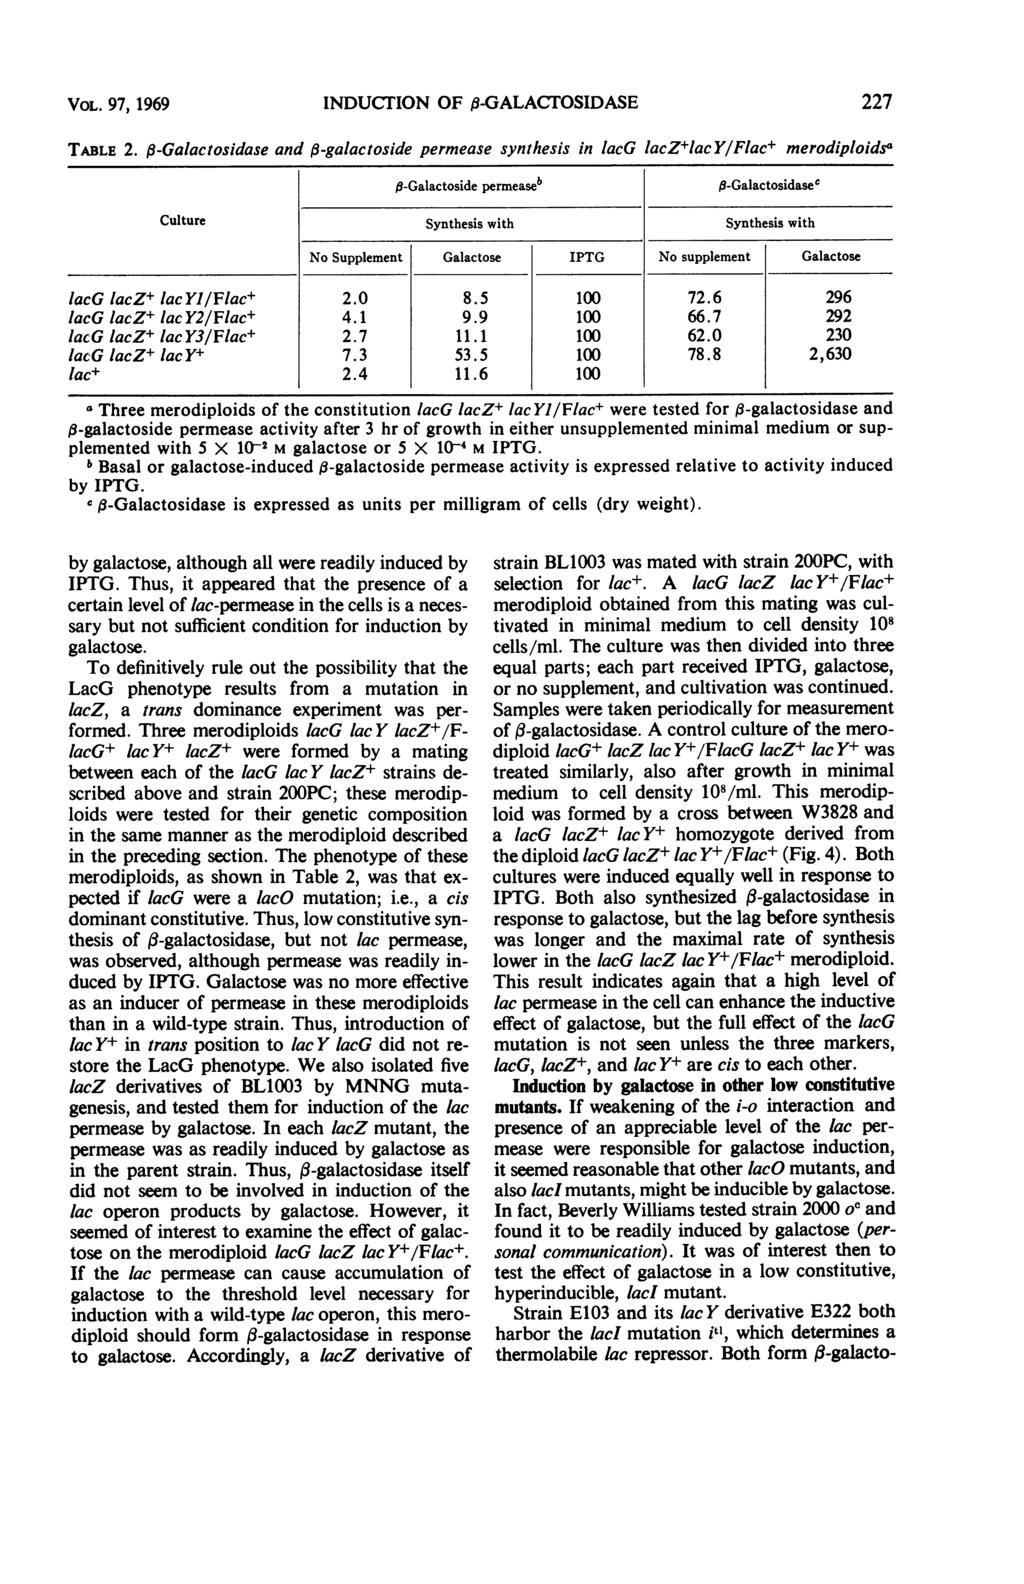 VOL. 97, 1969 NDUCTON OF j3-galactosdase TABLE 2.